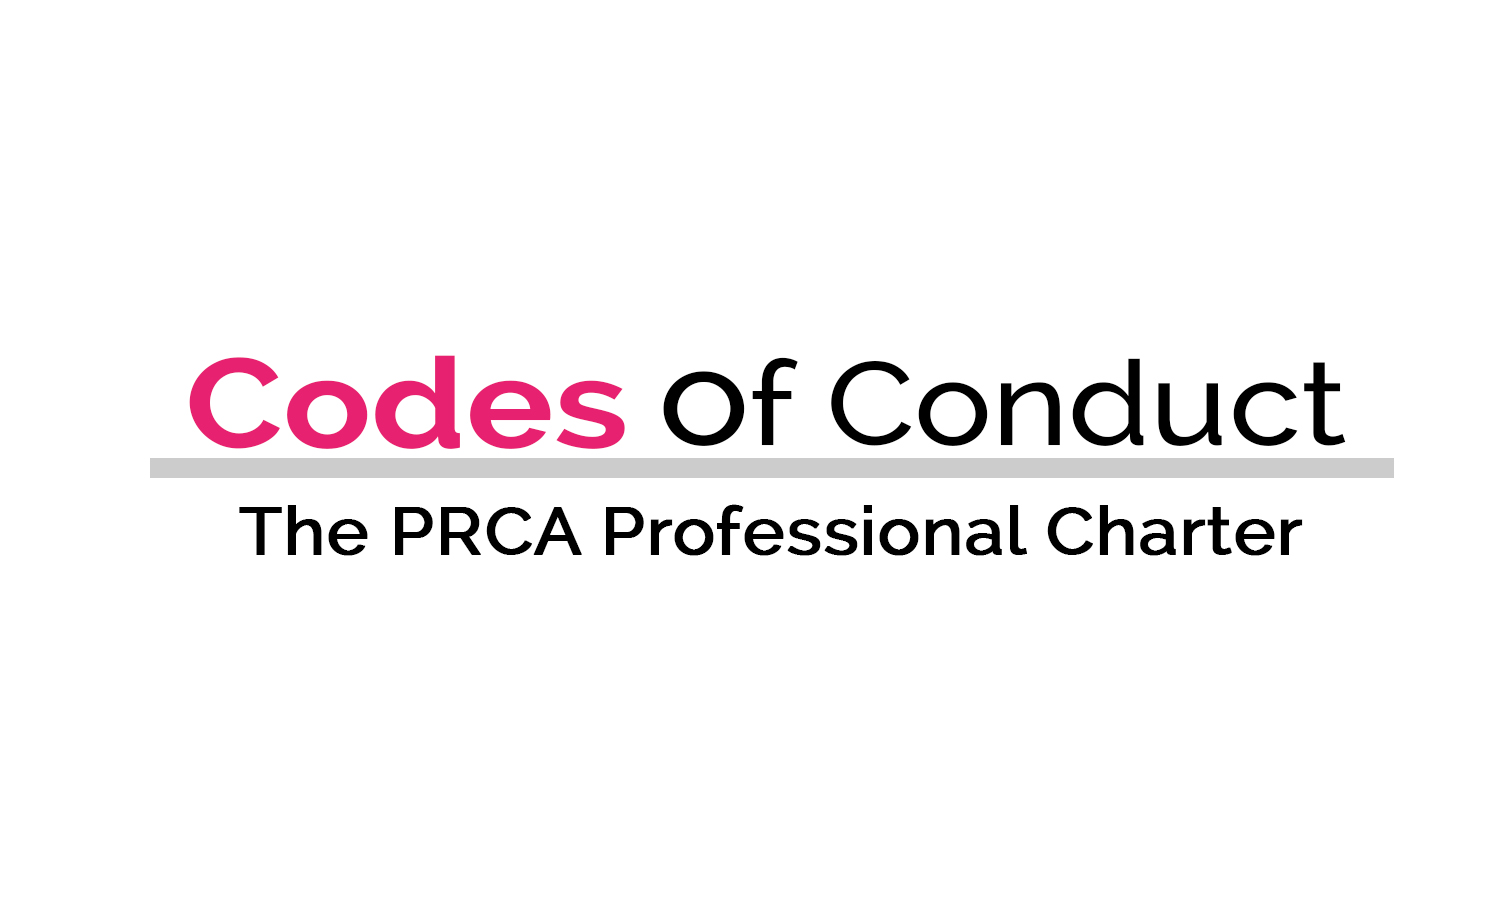 The PRCA Professional Charter and Codes of Conduct